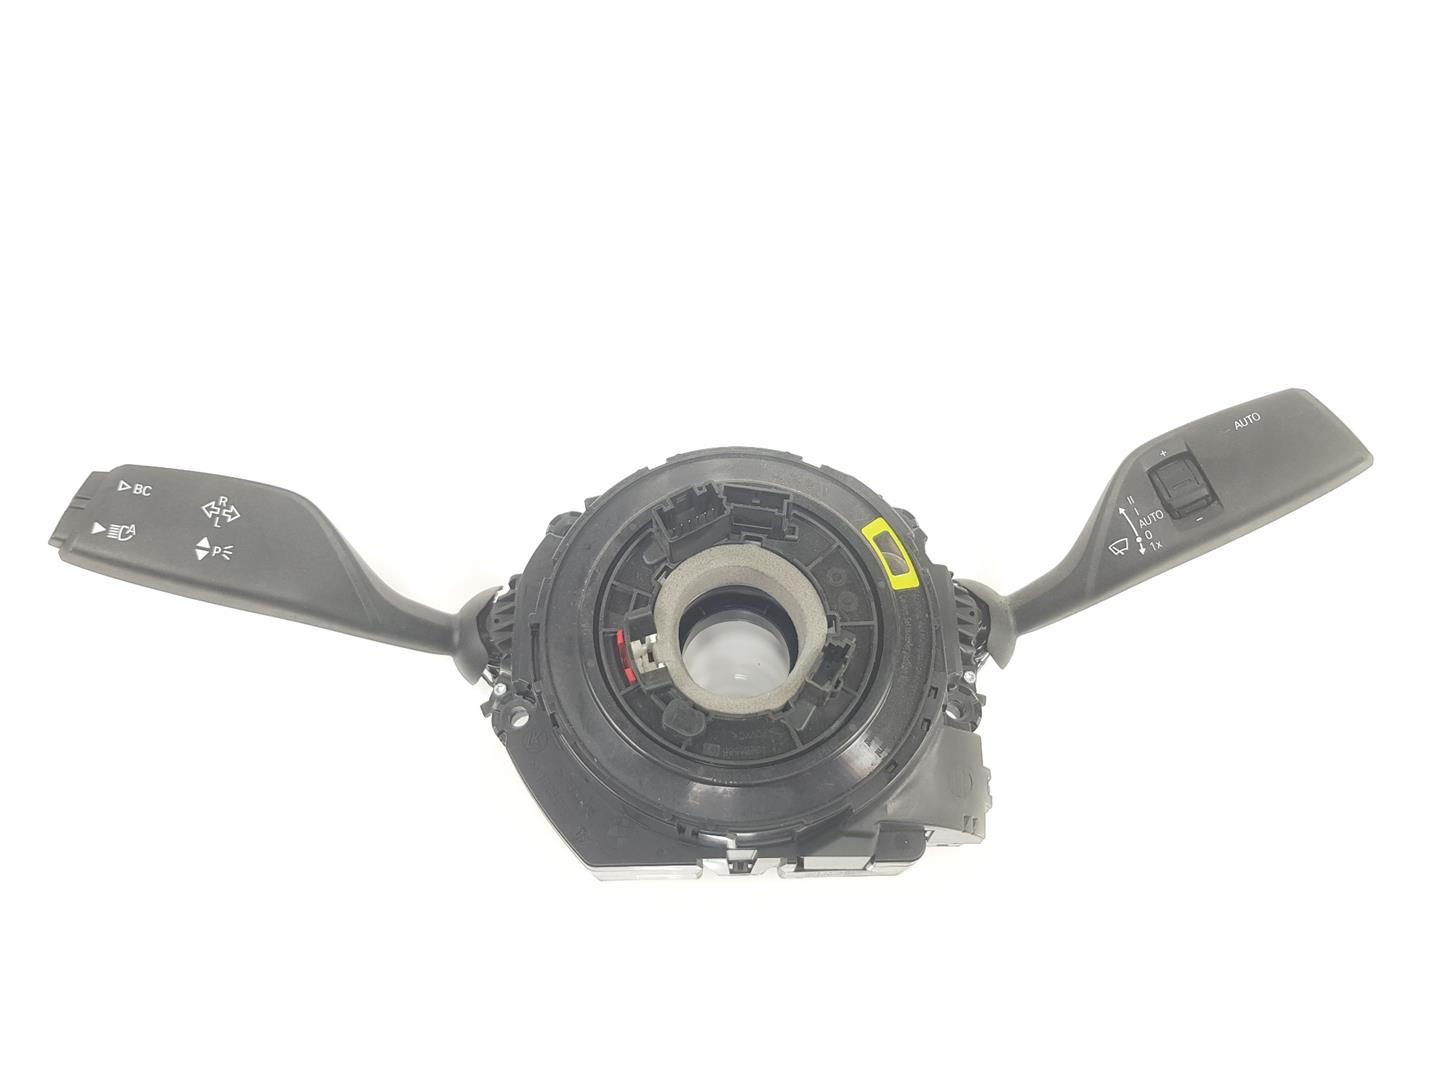 BMW 2 Series F22/F23 (2013-2020) Steering wheel buttons / switches 9490791, 61315A32CD4, 1141CB 24245573